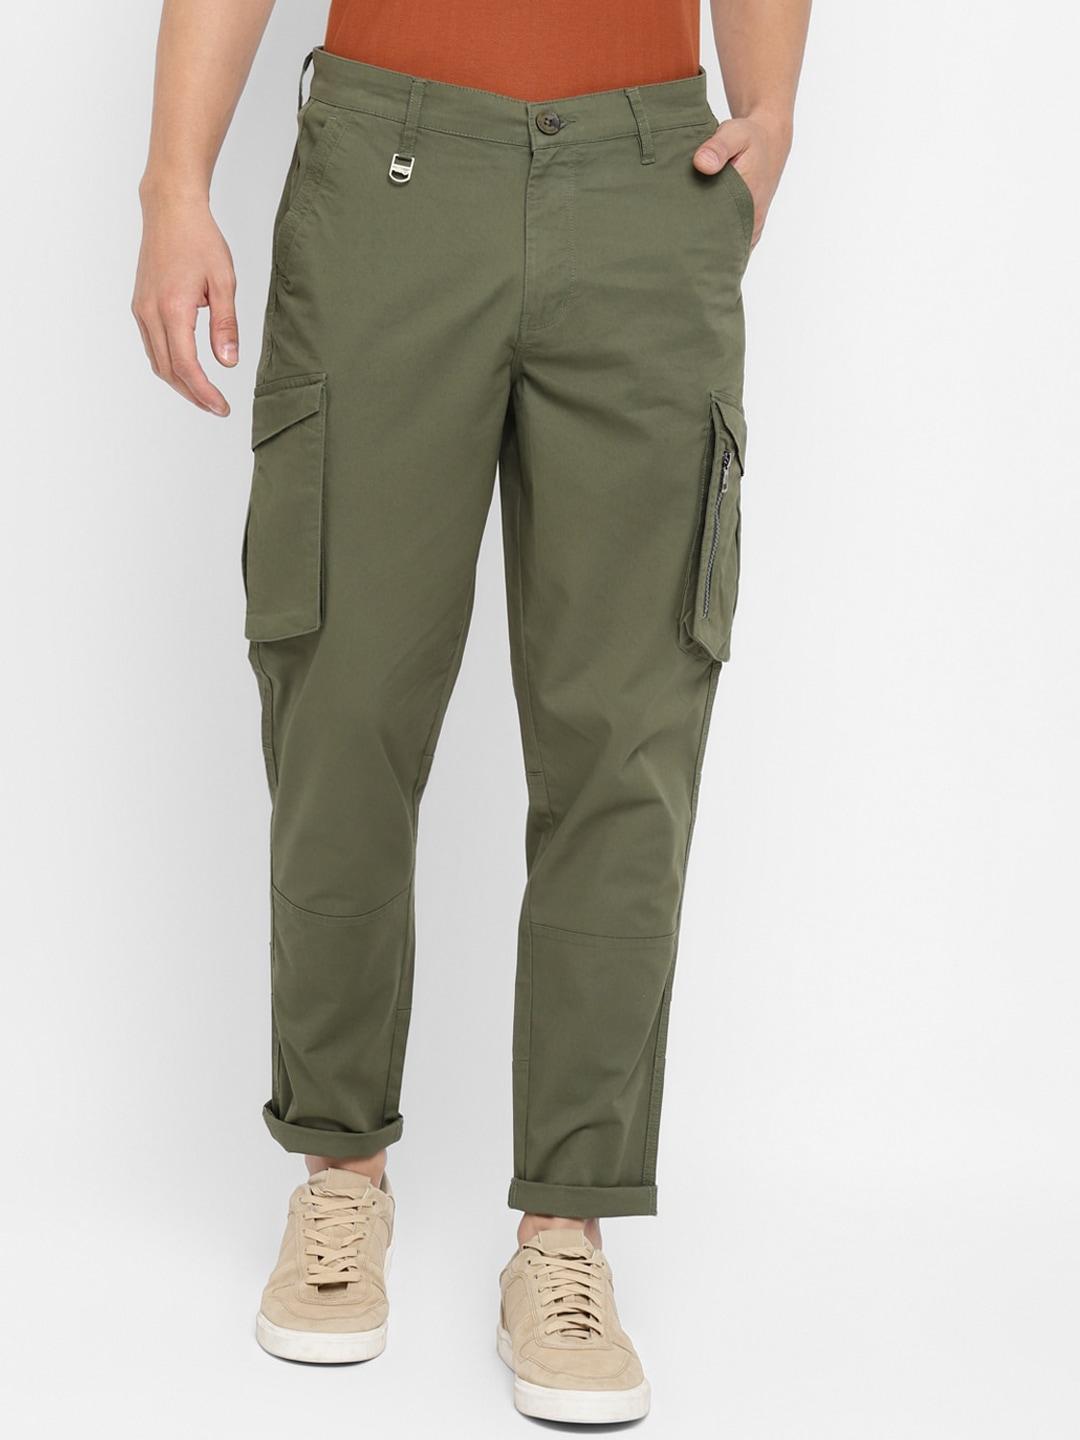 Red Chief Men Cotton Cargos Trousers